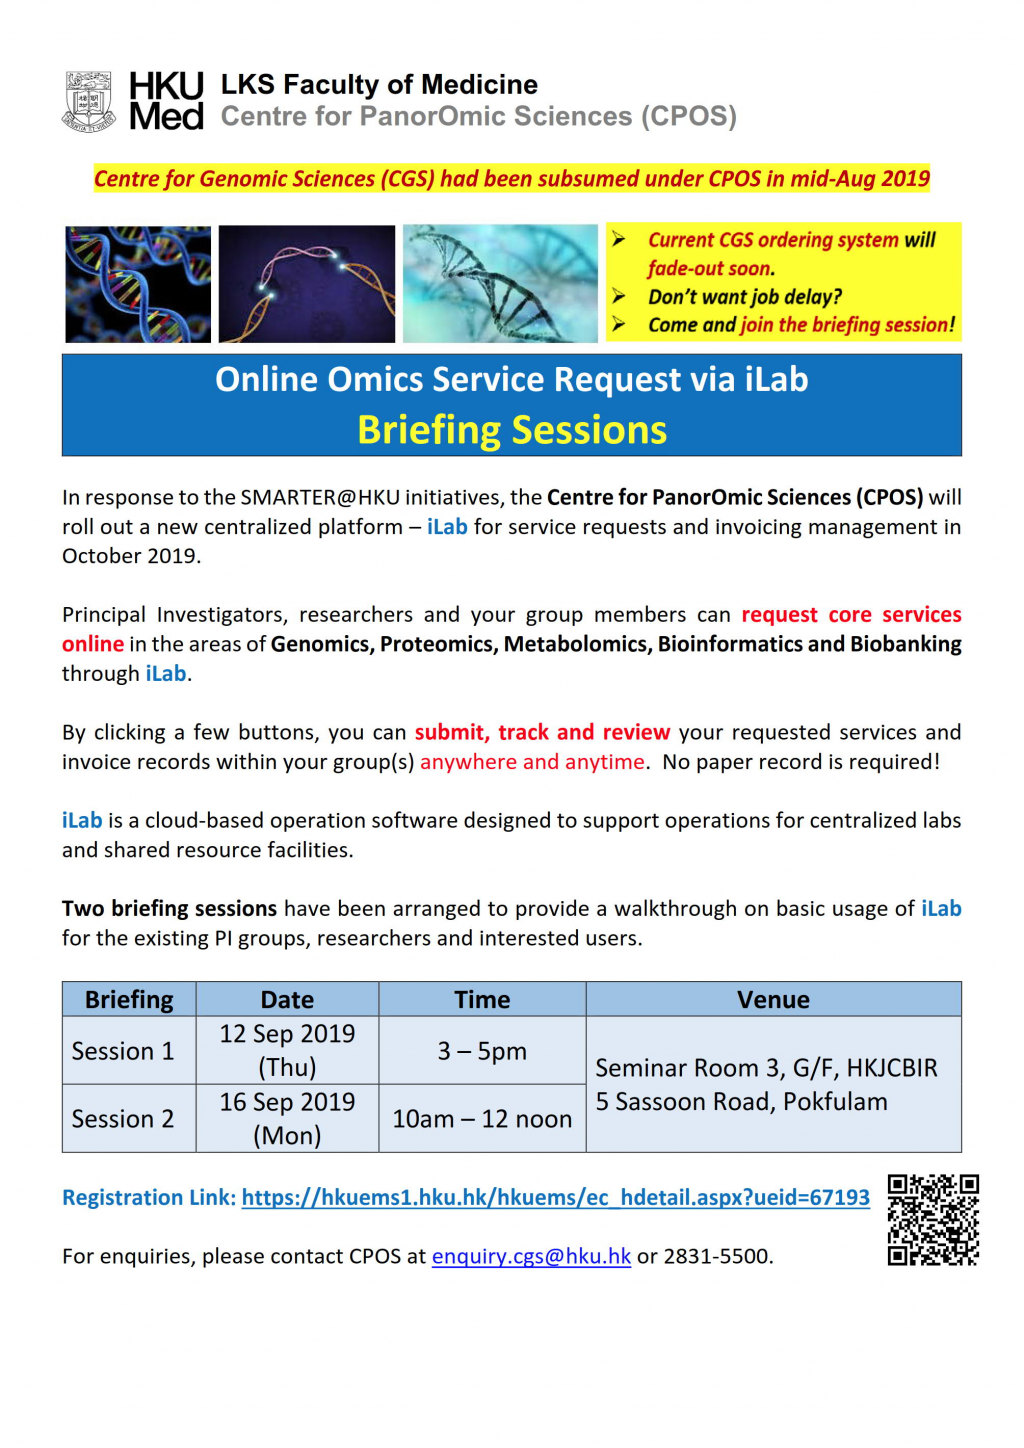 (12 and 16 Sep) Online Omics Service Request via iLab - Briefing Sessions